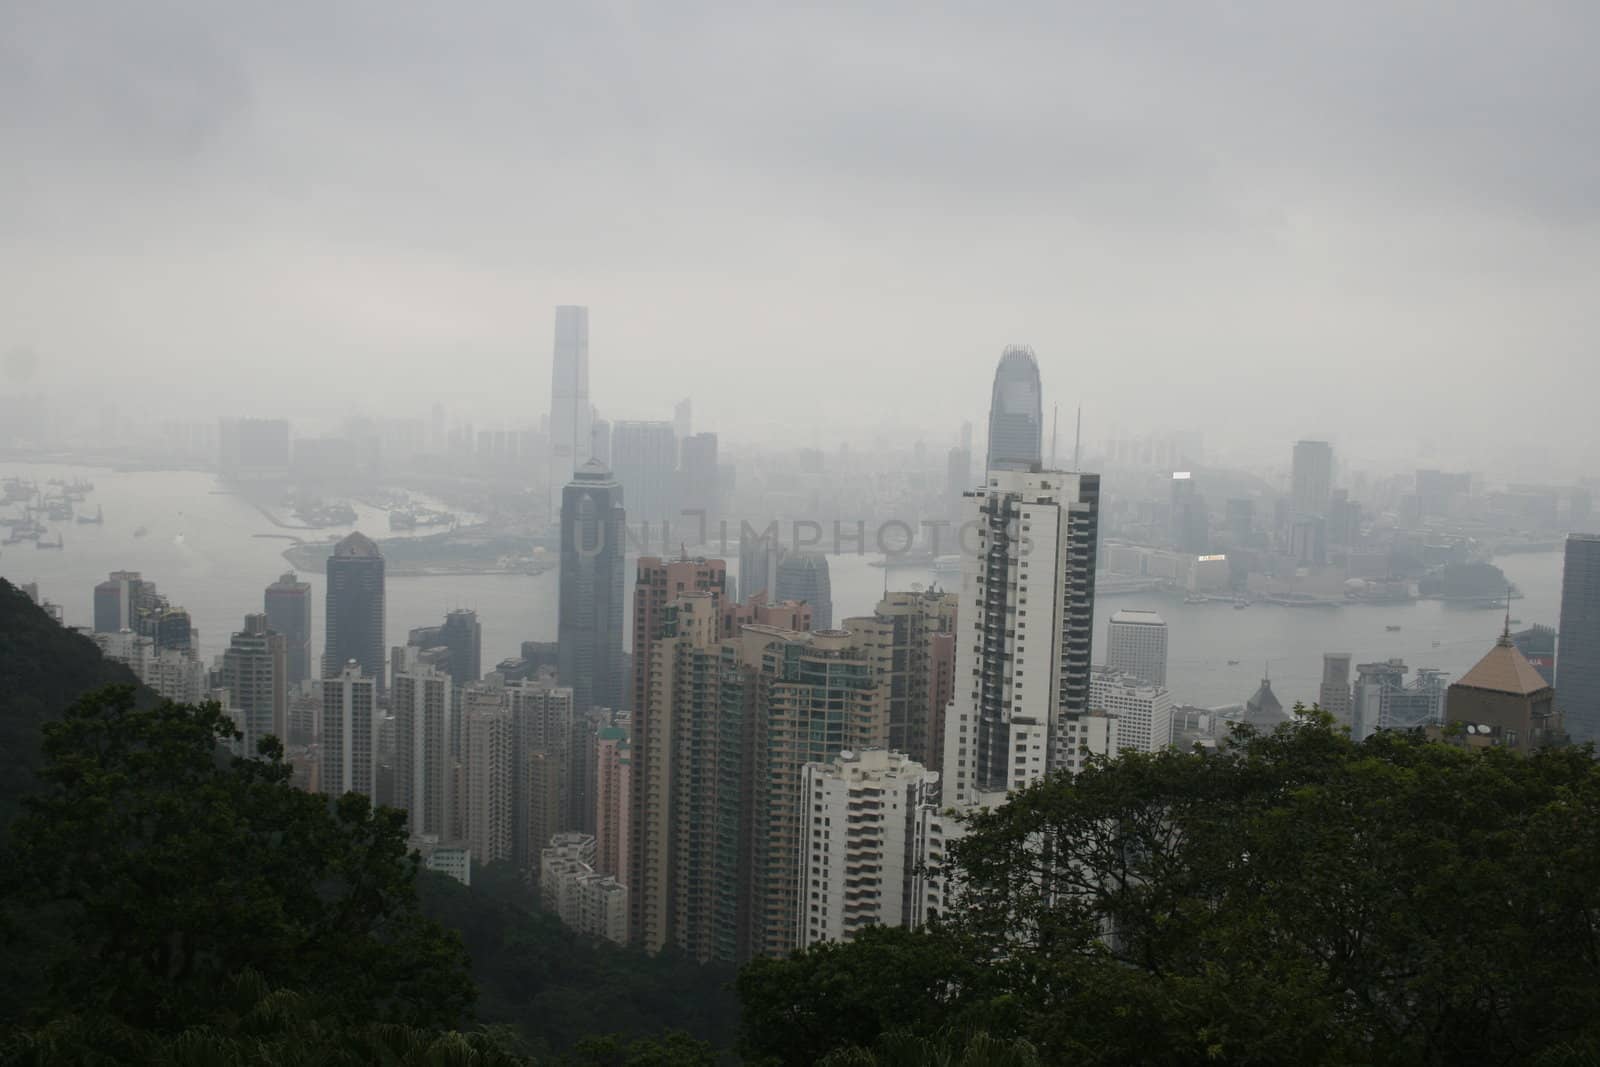 Hong Kong skyline as seen from the peak of the har by koep